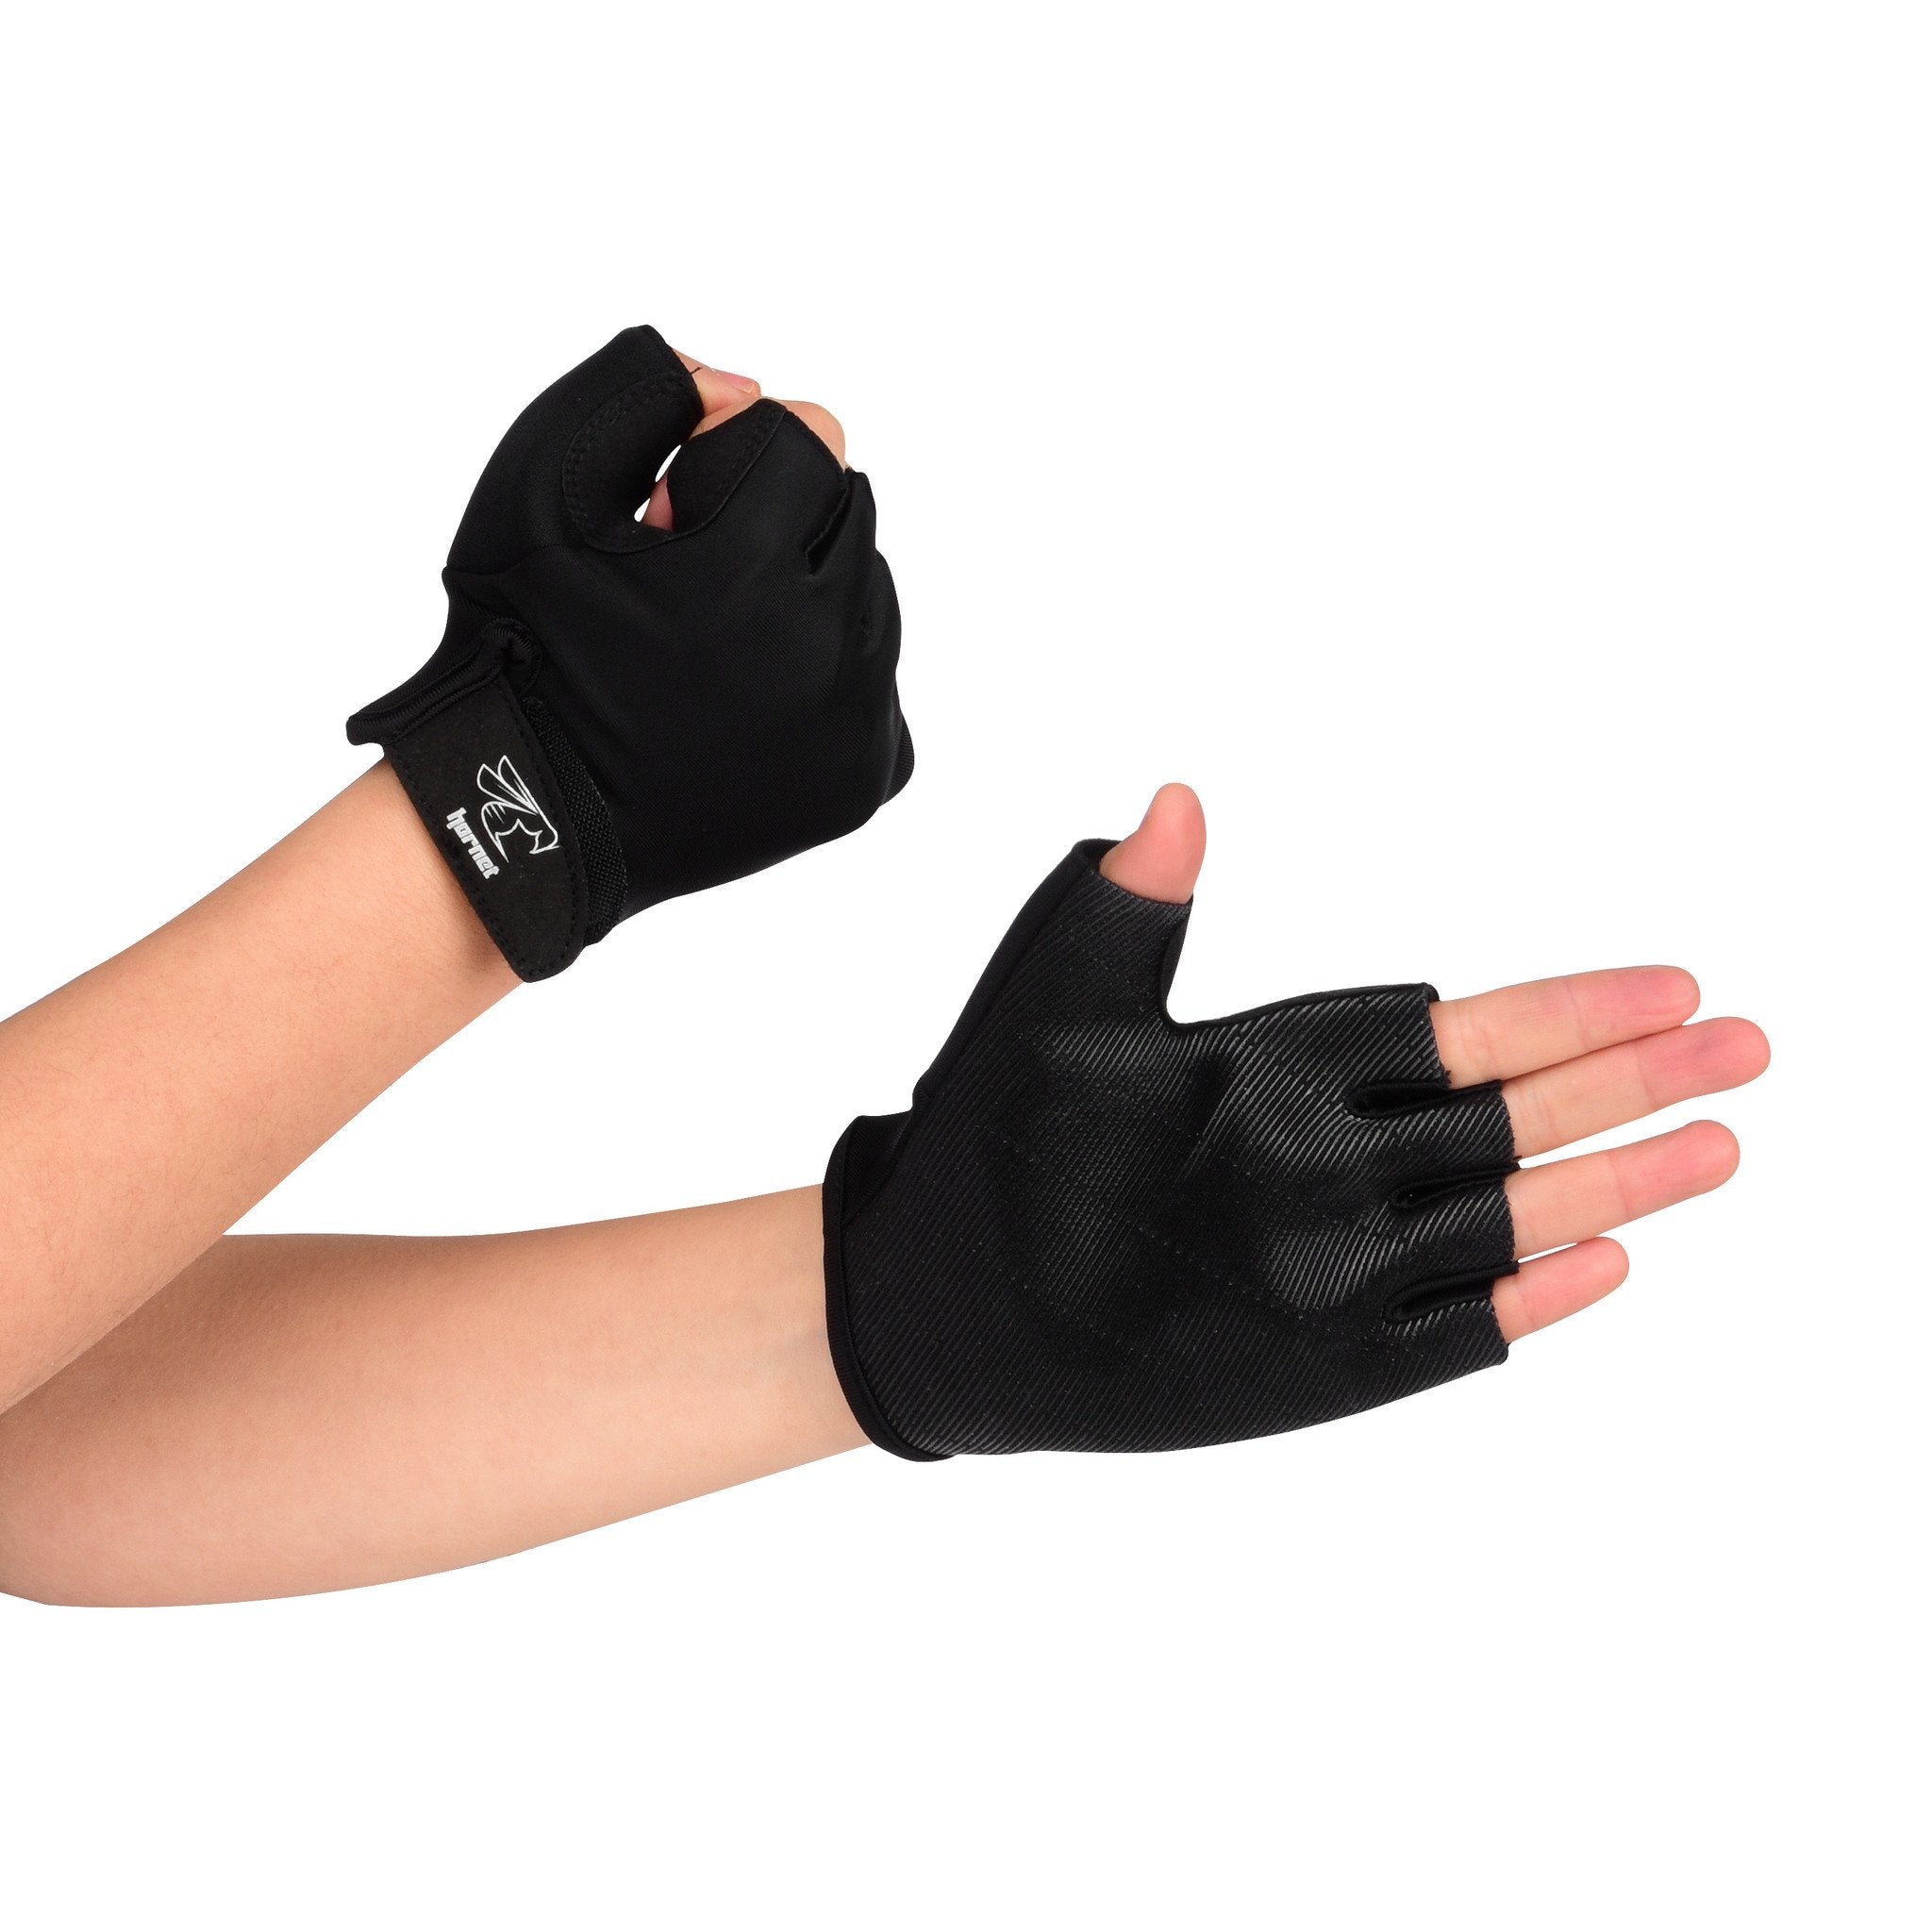 Paddling Gloves Ideal for Dragon Boat, SUP, OC and other